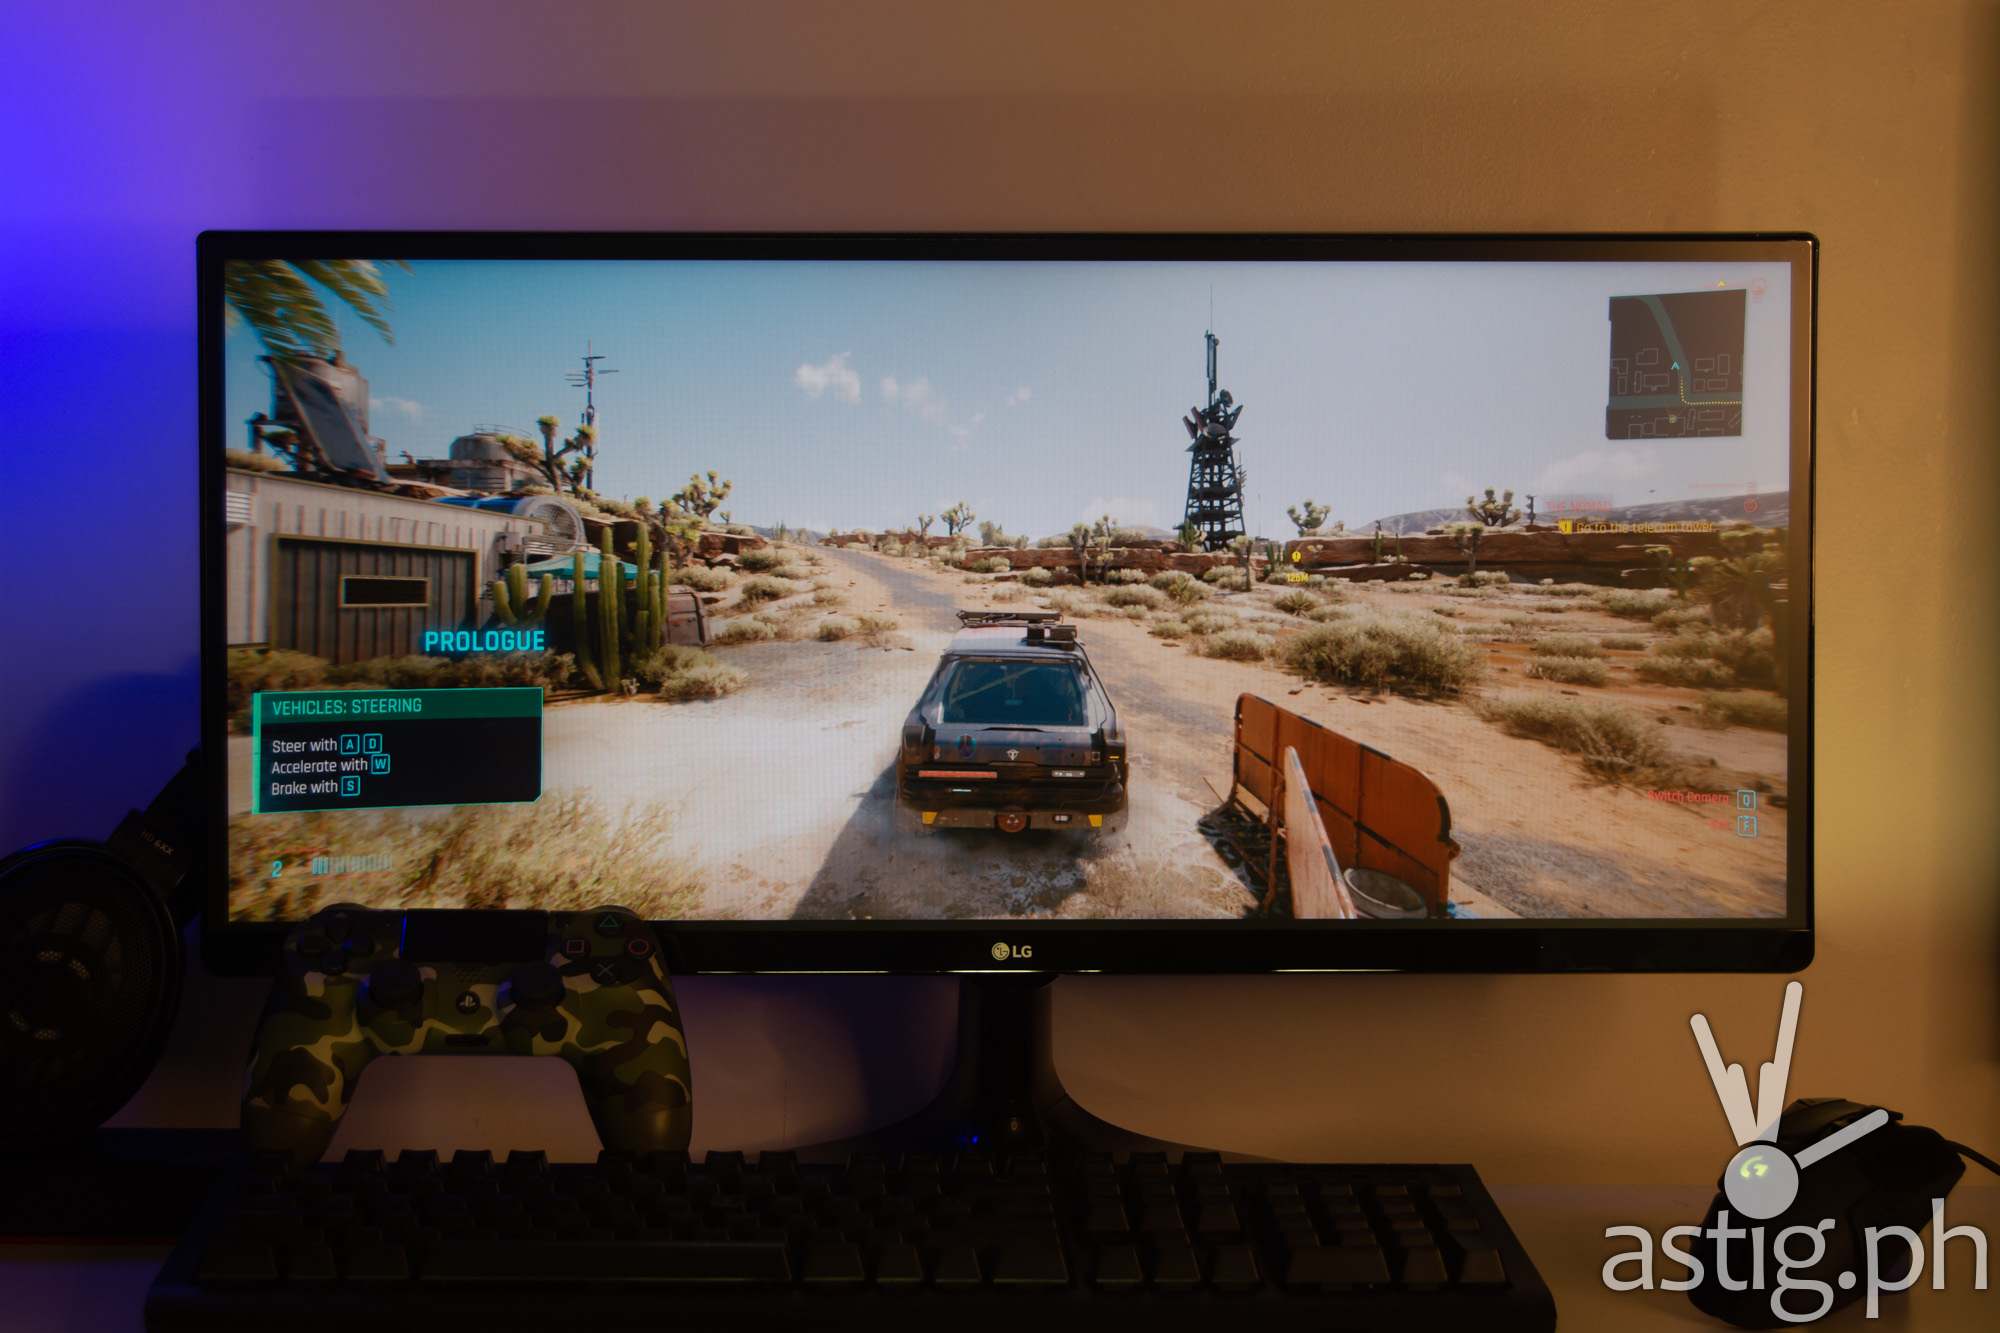 ik heb honger Blozend oogst LG UltraWide 25UM58 review: Grab-and-go IPS monitor for creatives and  content creators | ASTIG.PH